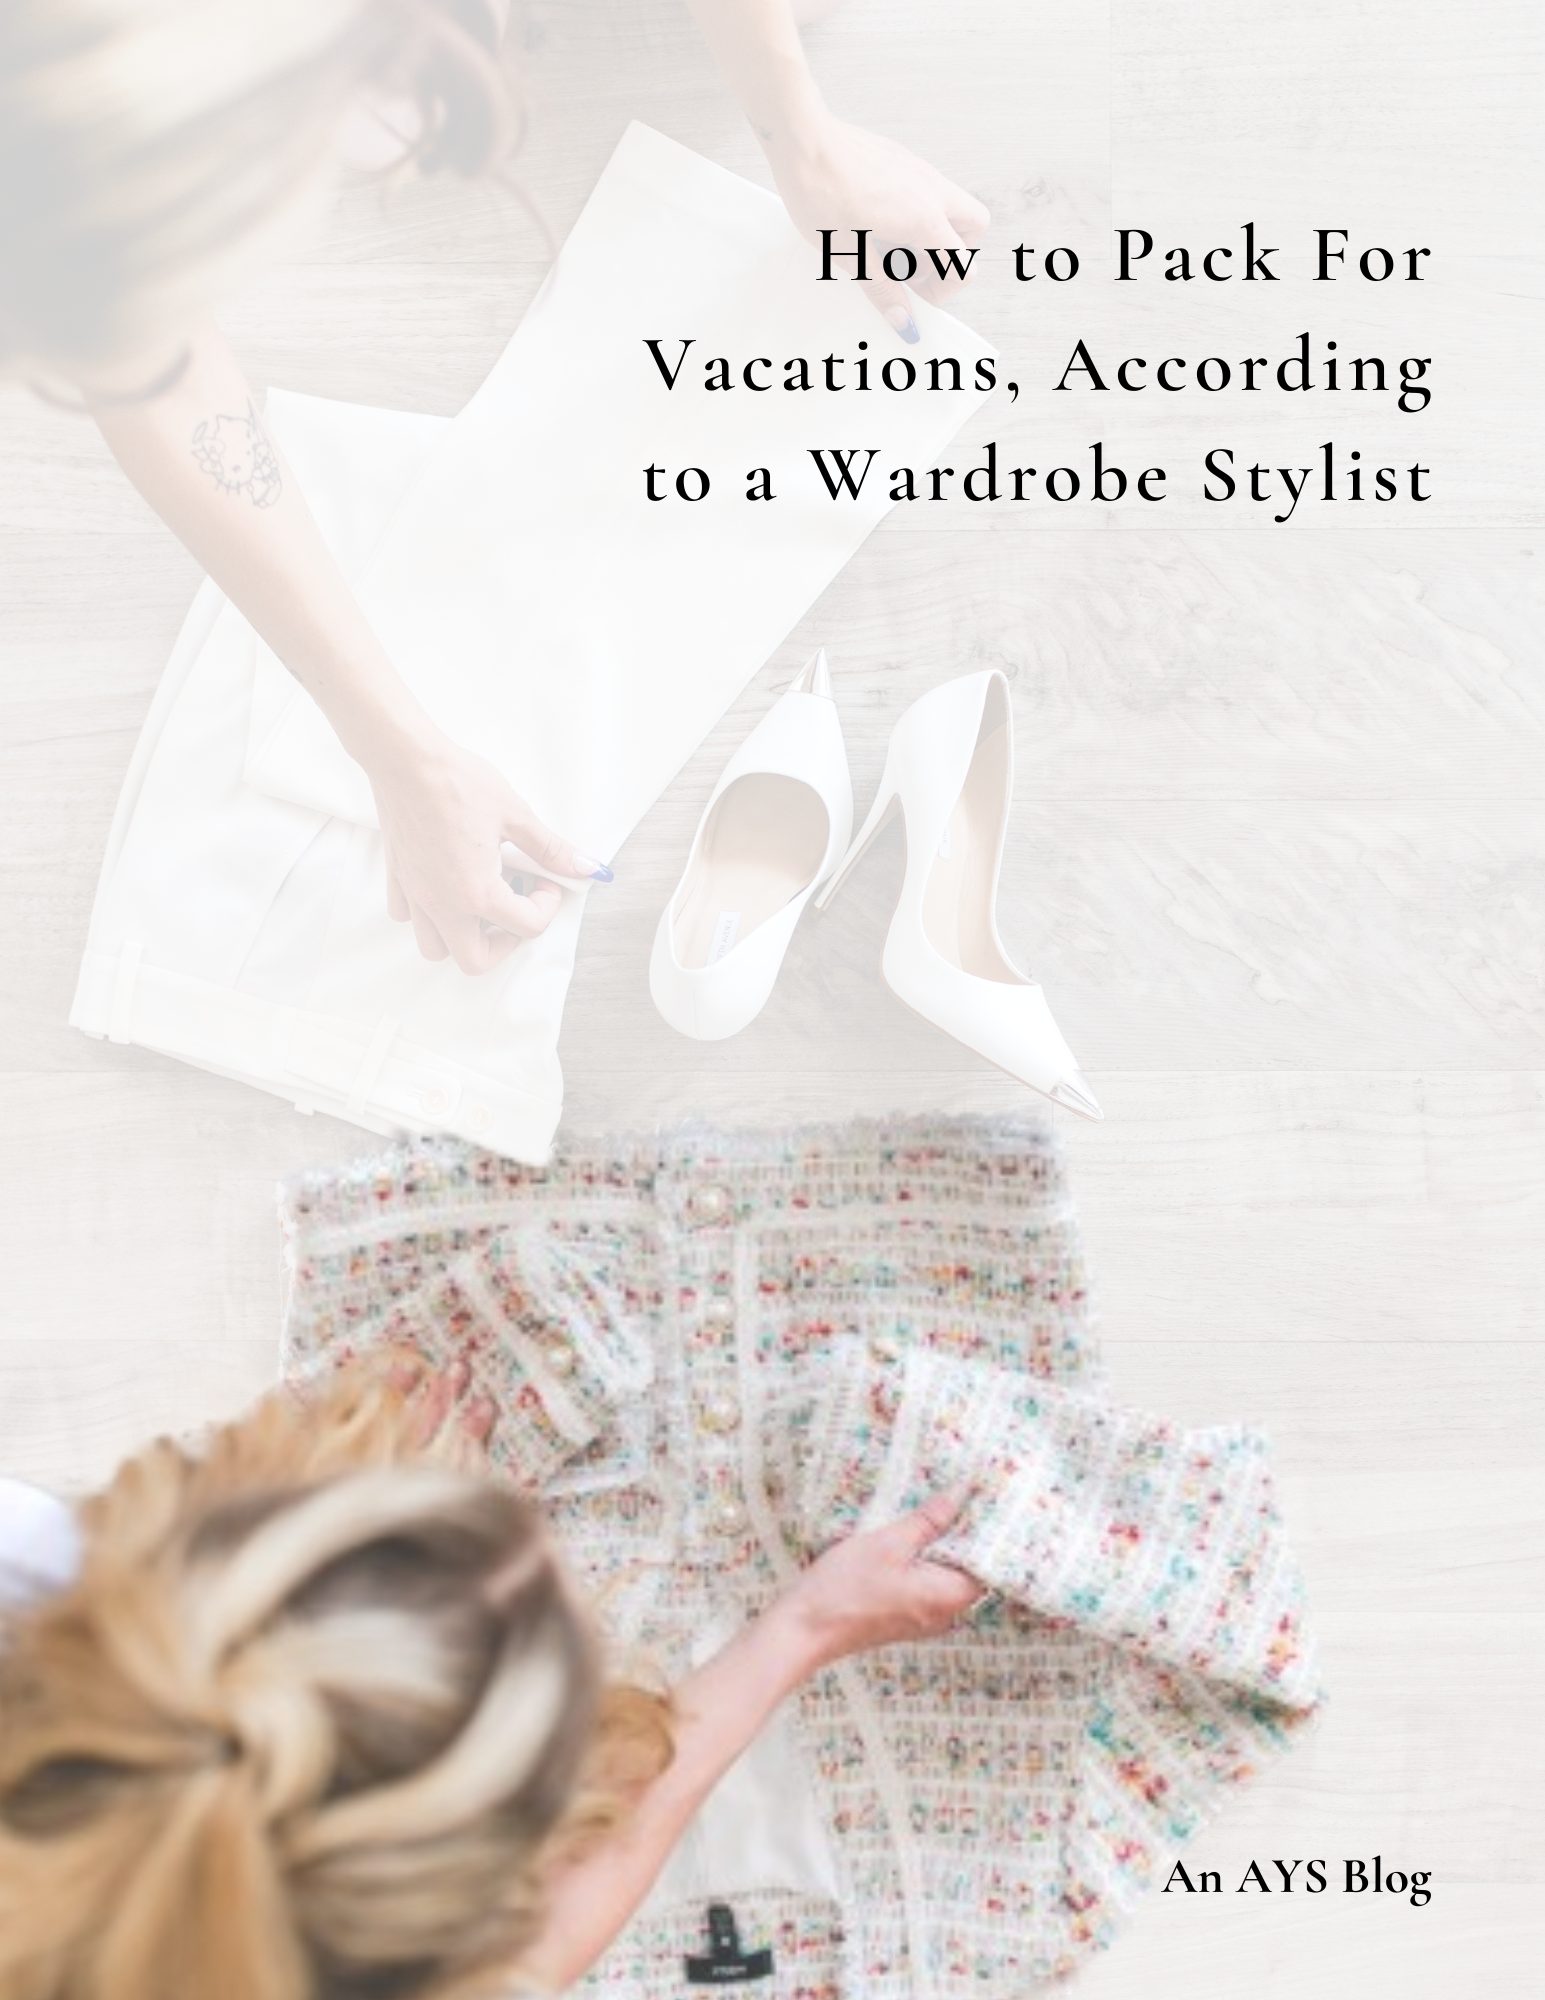 How to Pack For Vacations, According to a Wardrobe Stylist An AYS Blog